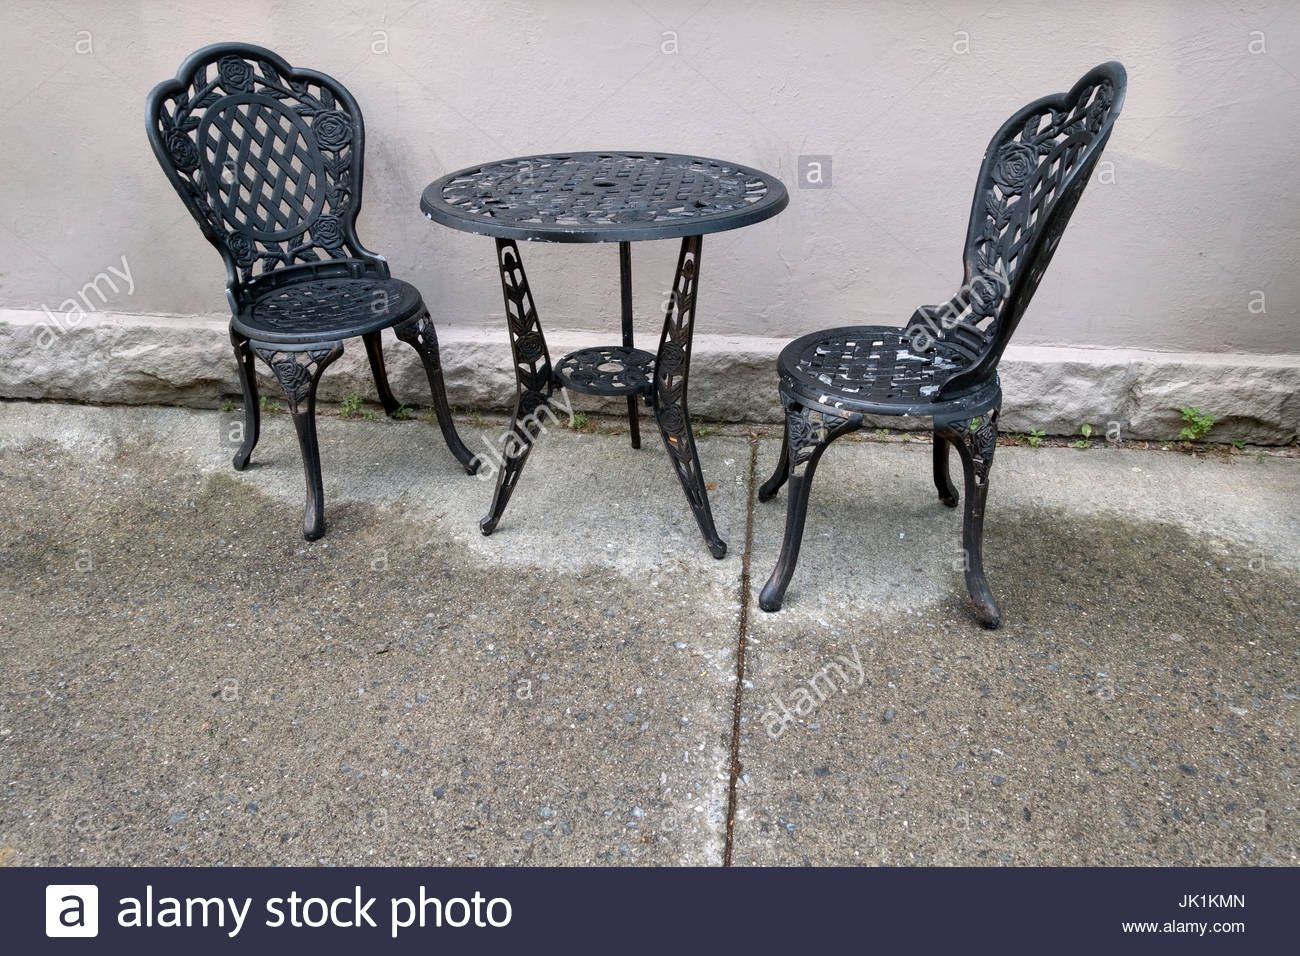 Cast Iron Chairs Stock Photos & Cast Iron Chairs Stock Images – Alamy Intended For Current Chapleau Ii Side Chairs (View 17 of 20)